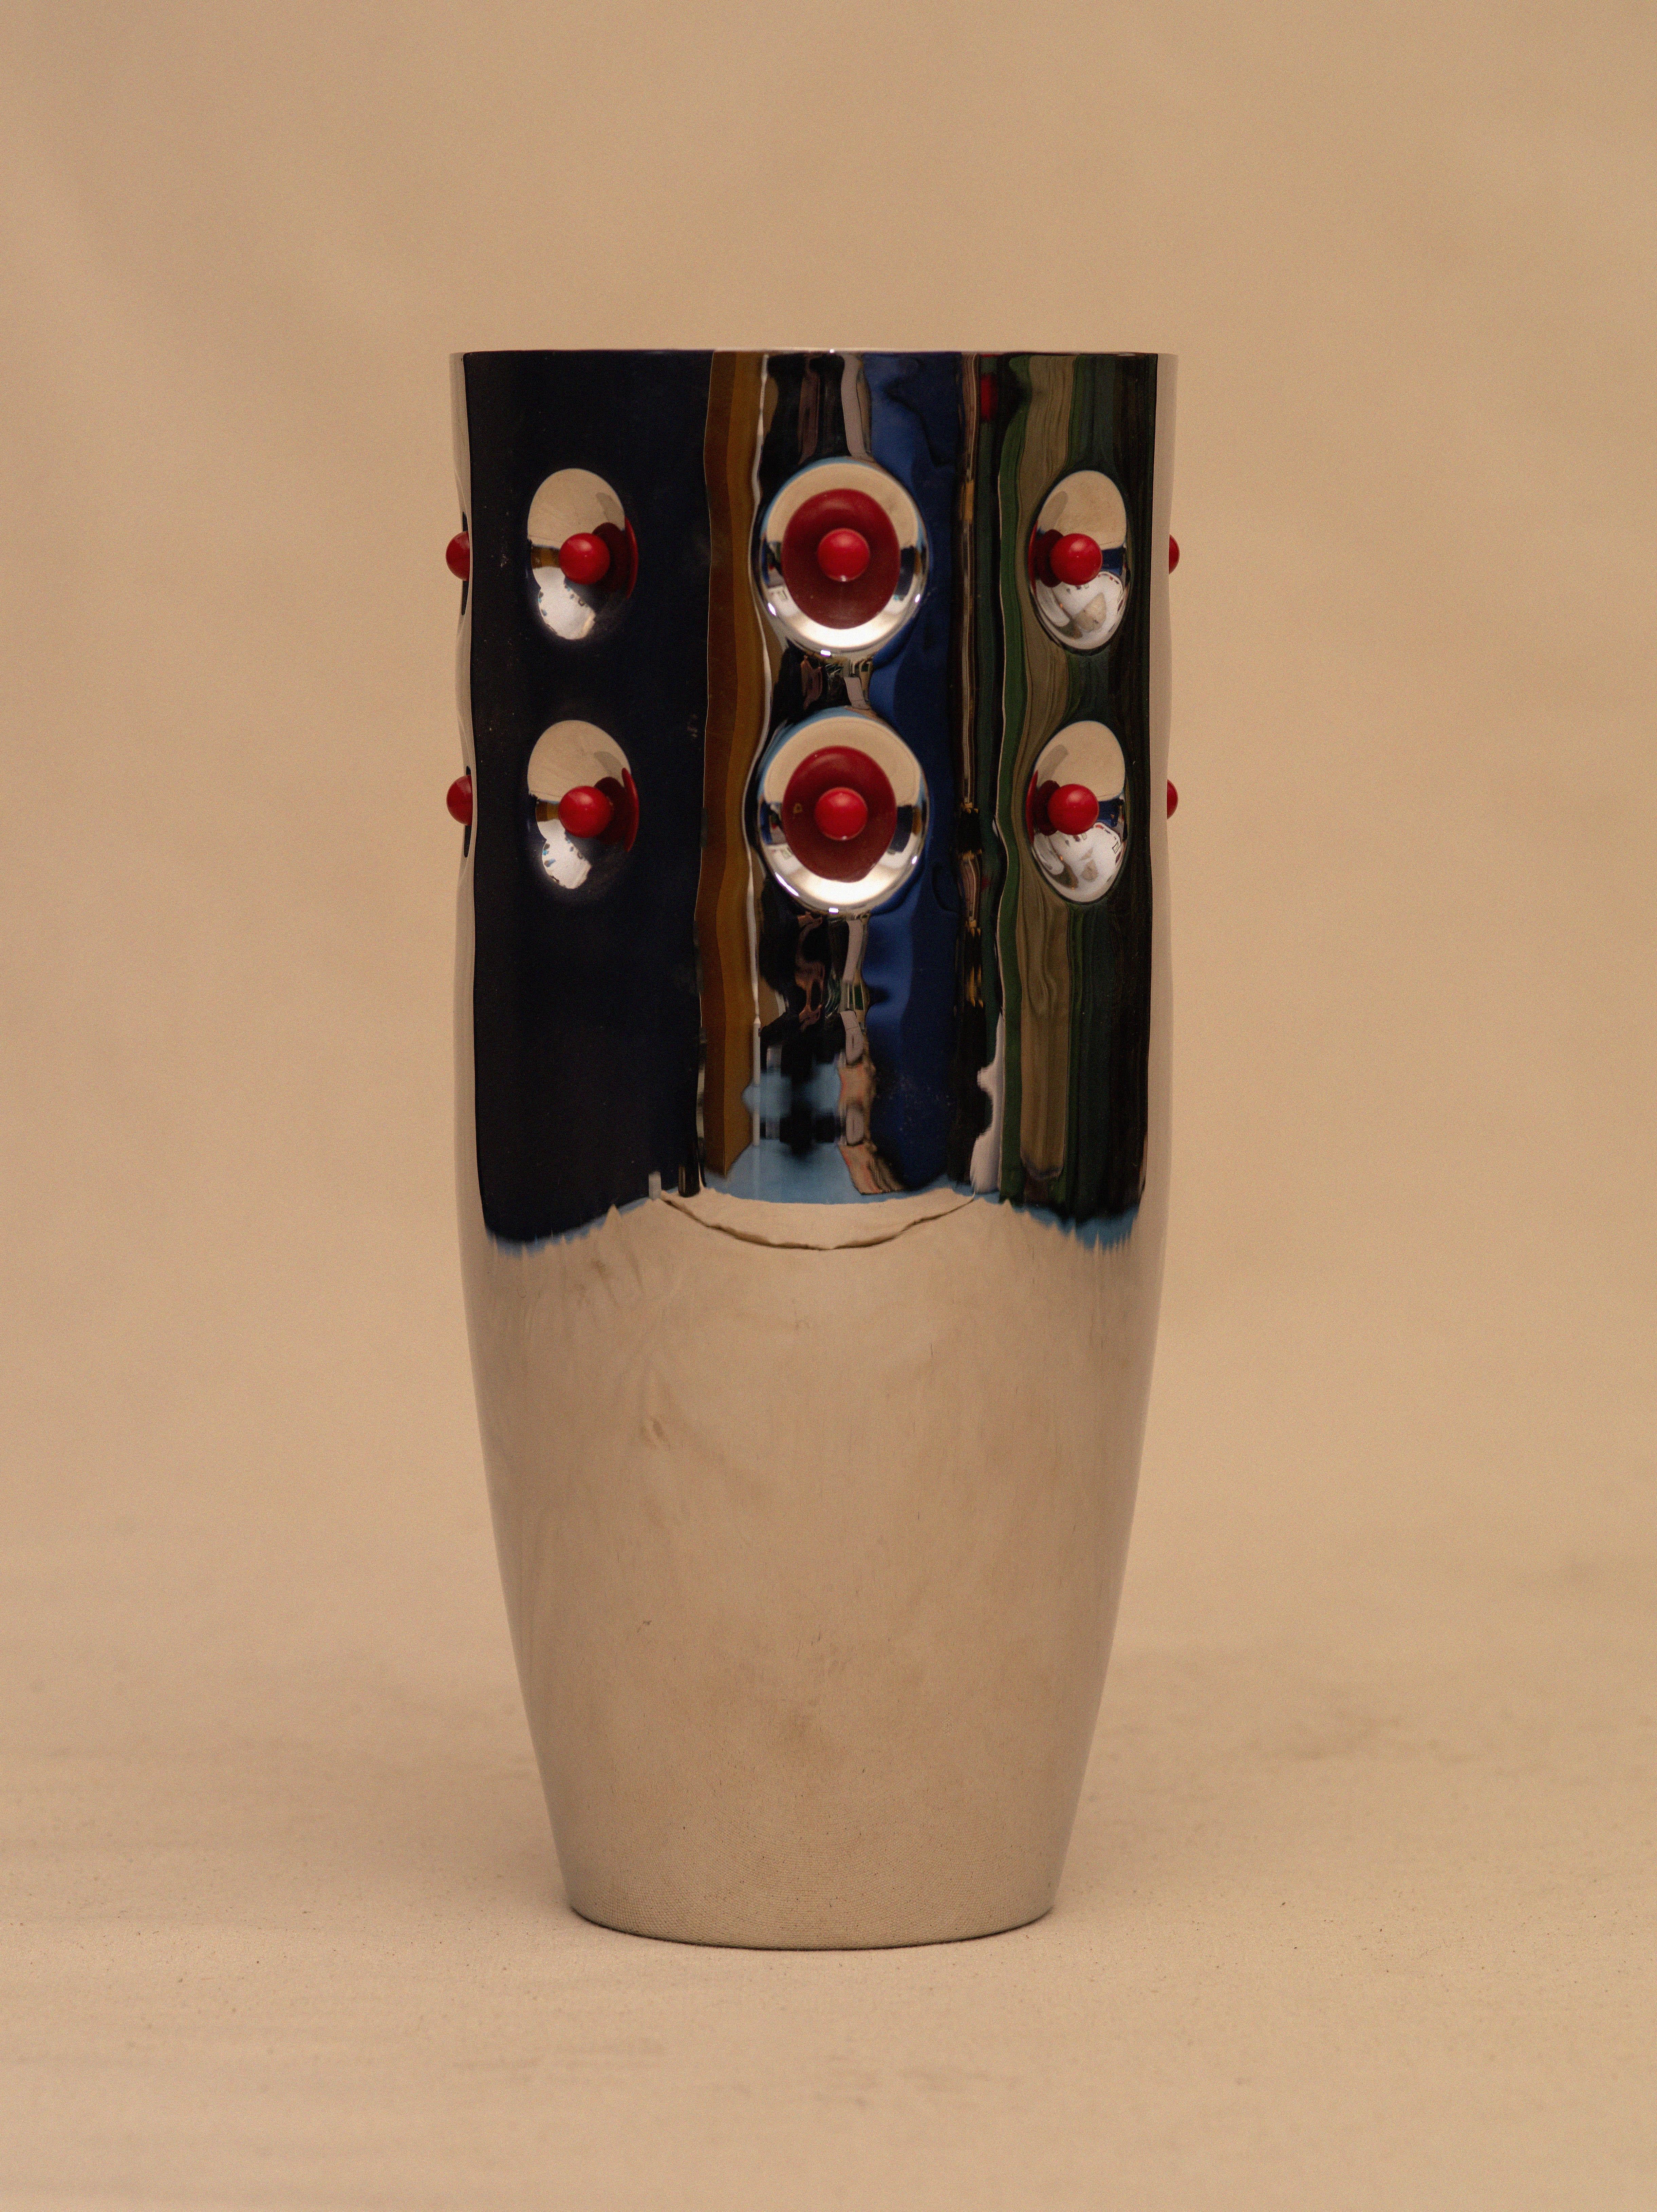 
Made in Italy, a large modern design steel vase with crimson balls. Marked on bottom. An extremely rare and hard to find vase. Unique as well as beautiful, powerful and elegant. Of course all objects I have are statements, but this Tobia Scarpa